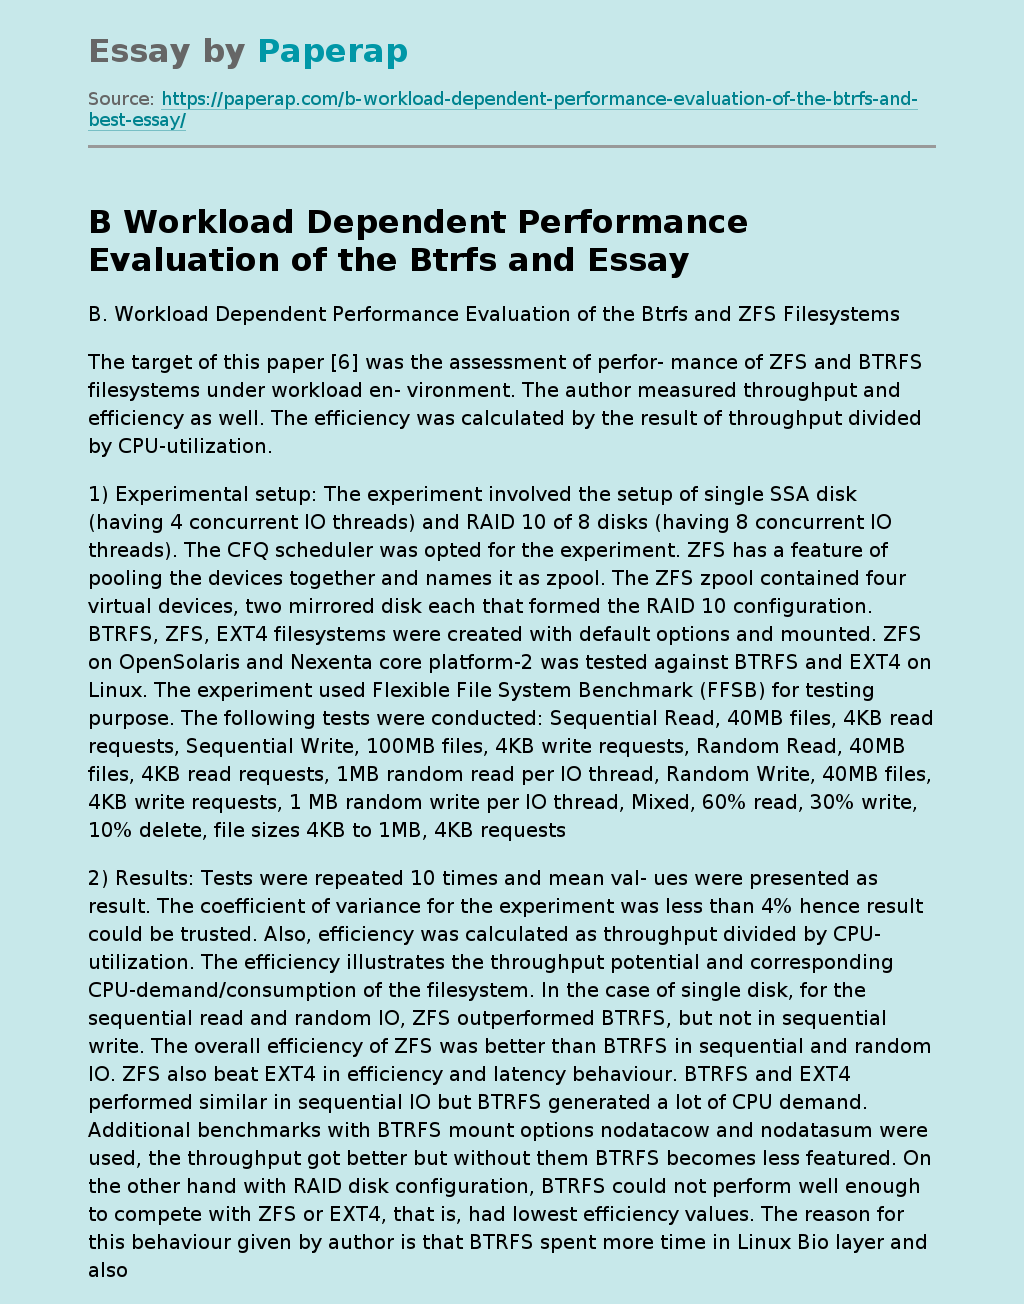 B Workload Dependent Performance Evaluation of the Btrfs and